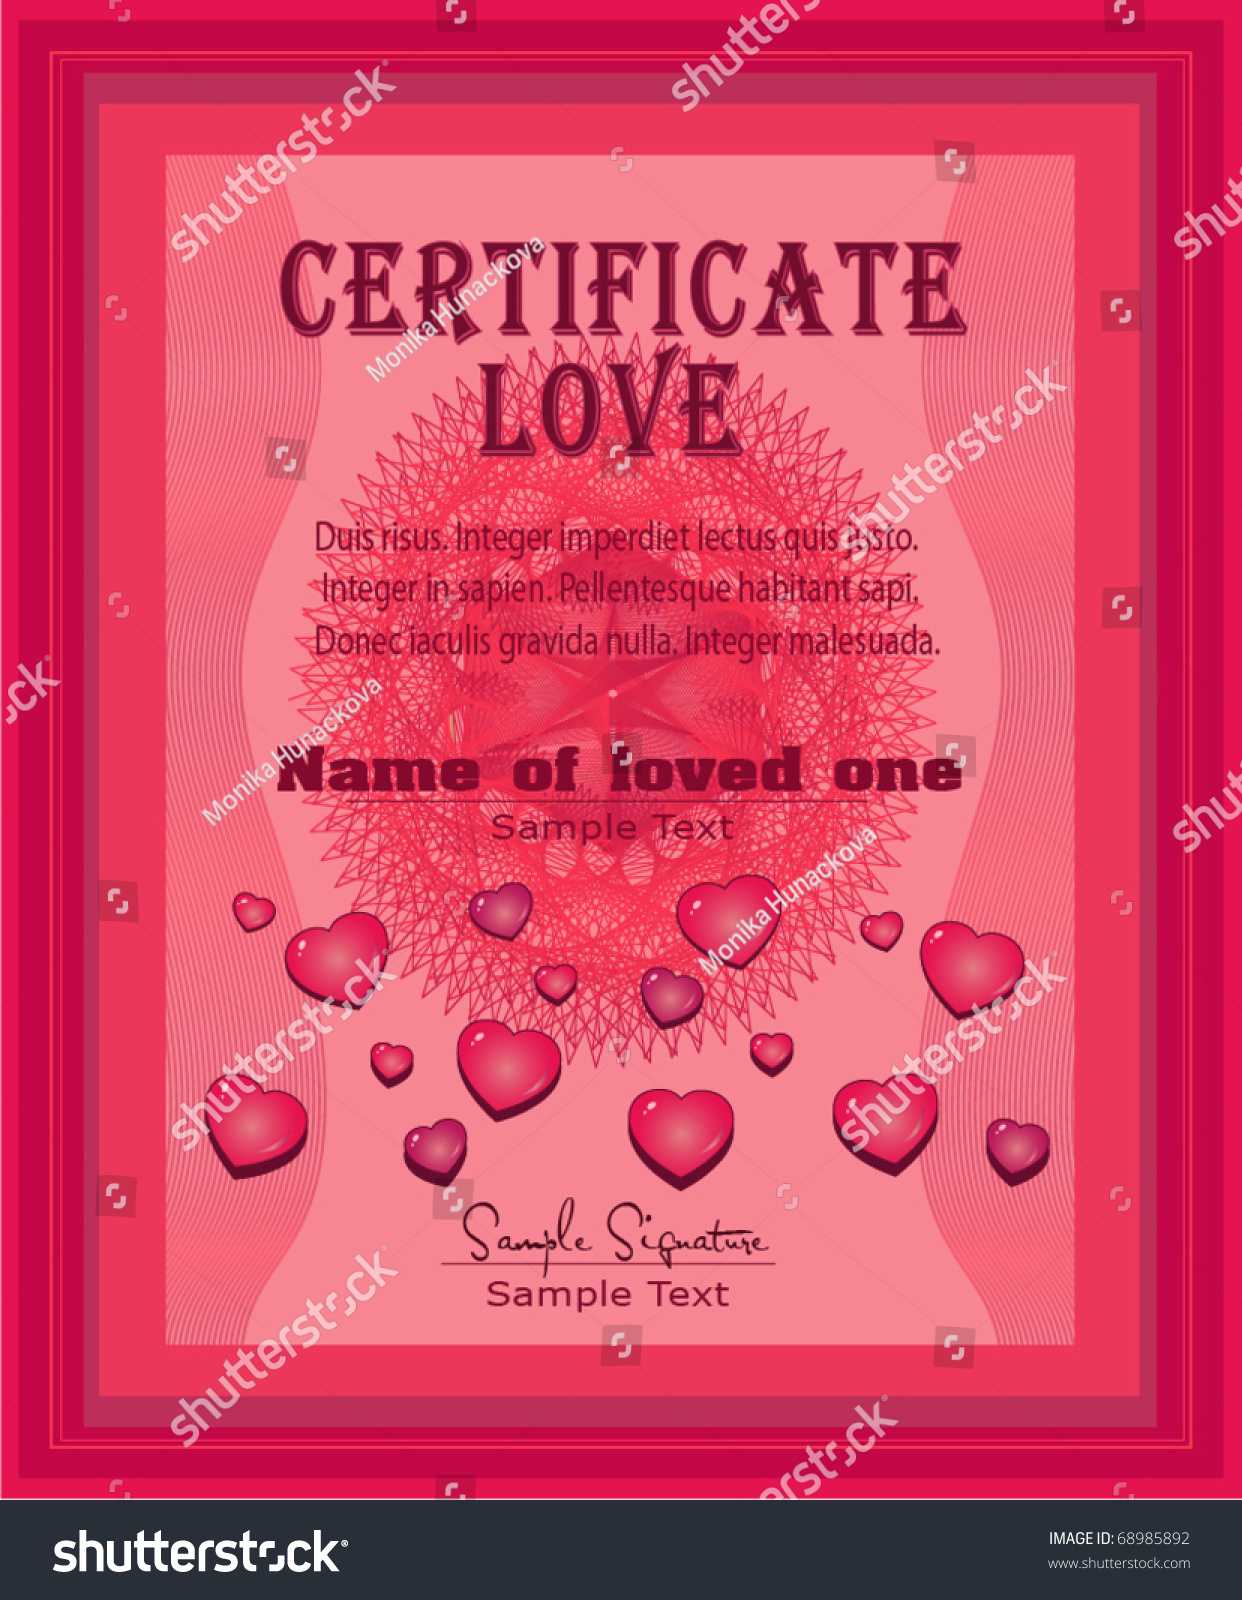 Certificate Love Vector Template | Royalty Free Stock Image With Love Certificate Templates